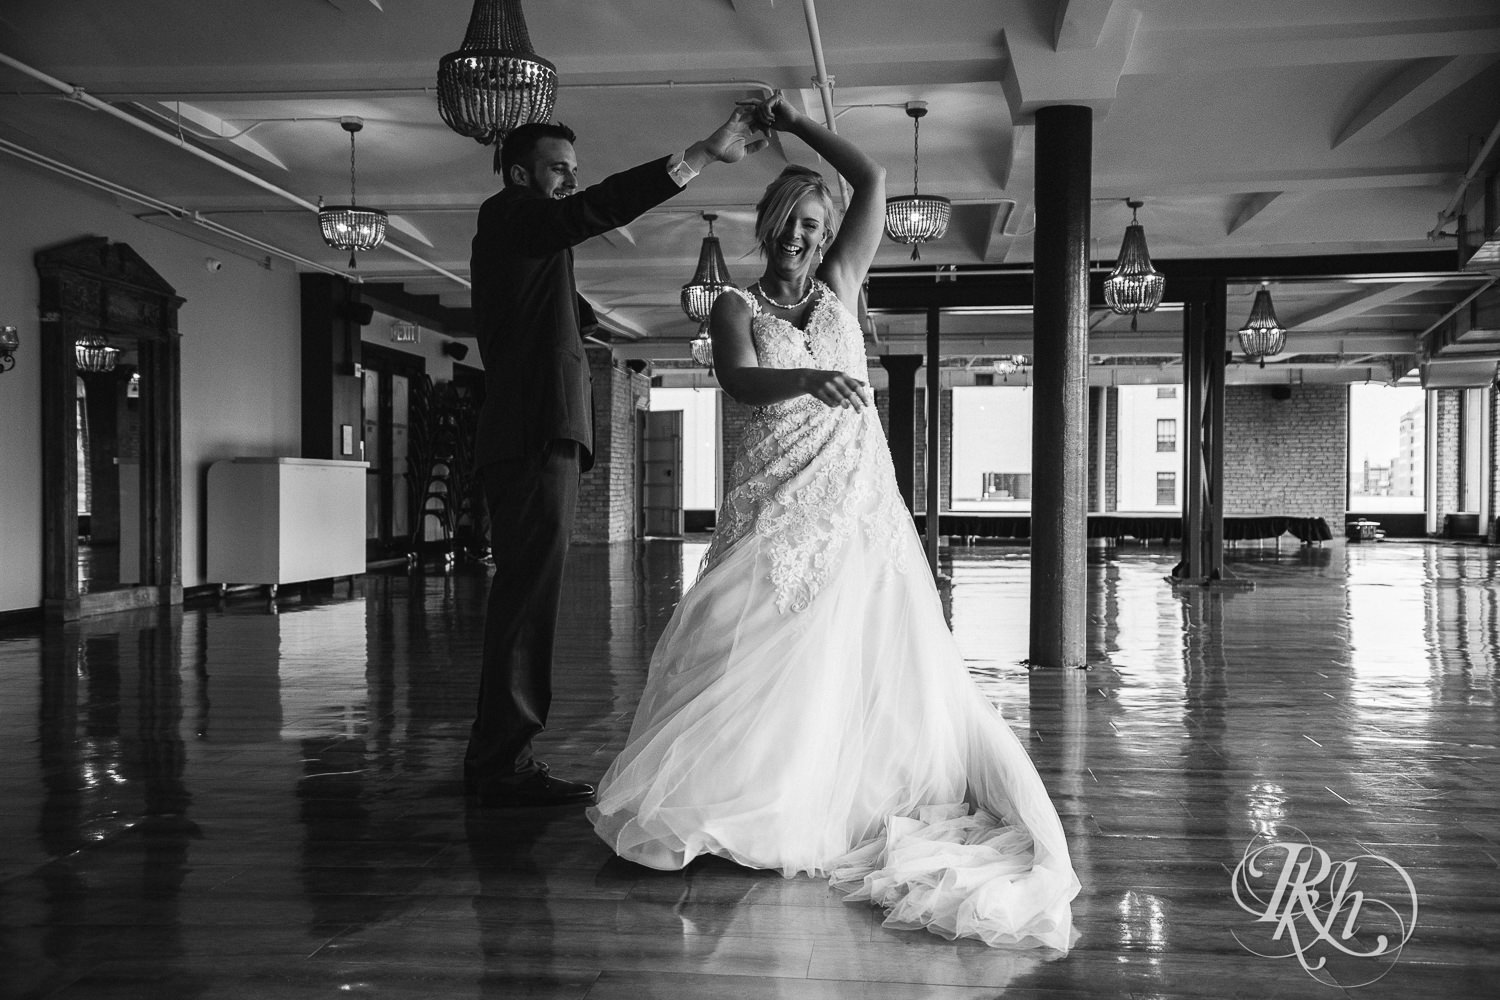 Bride and groom dance on wedding day at Lumber Exchange Event Center in Minneapolis, Minnesota.